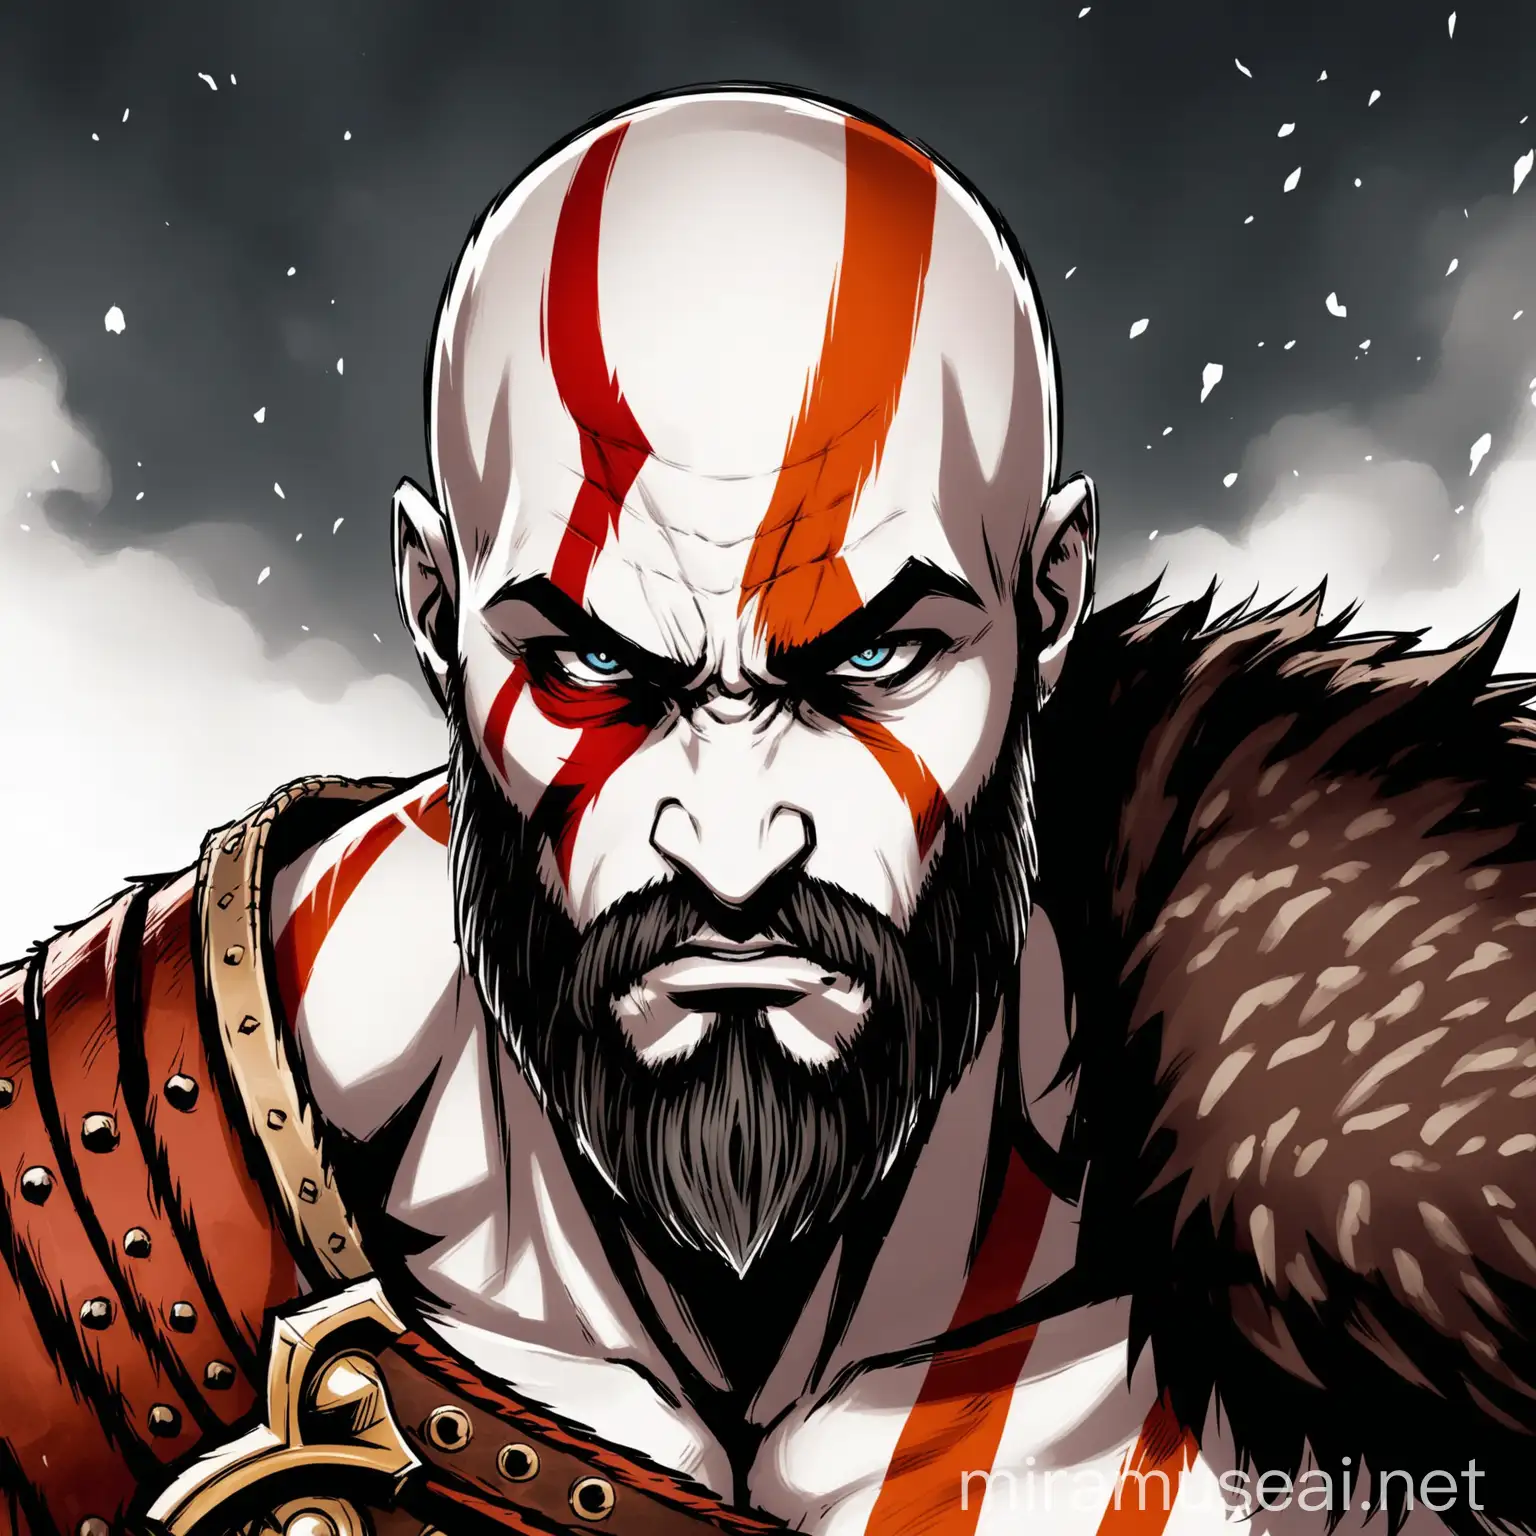 A frontal picture of Kratos from god of war ragnarok looking at the camera